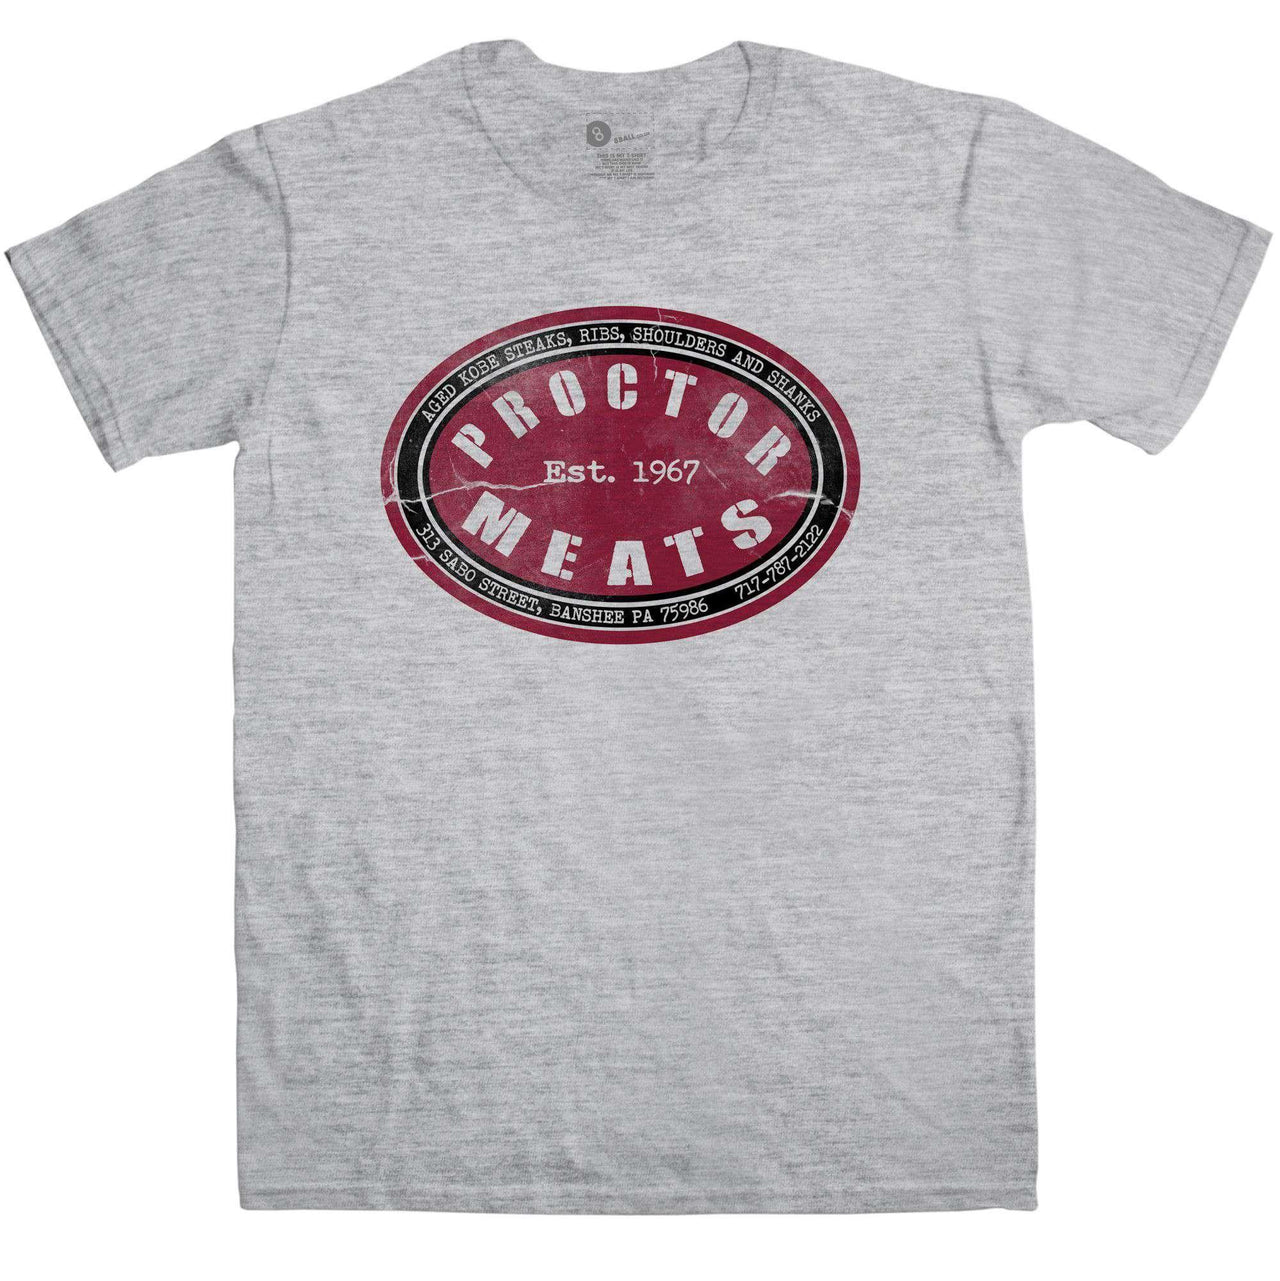 Proctor Meats T-Shirt For Men, Inspired By Banshee 8Ball